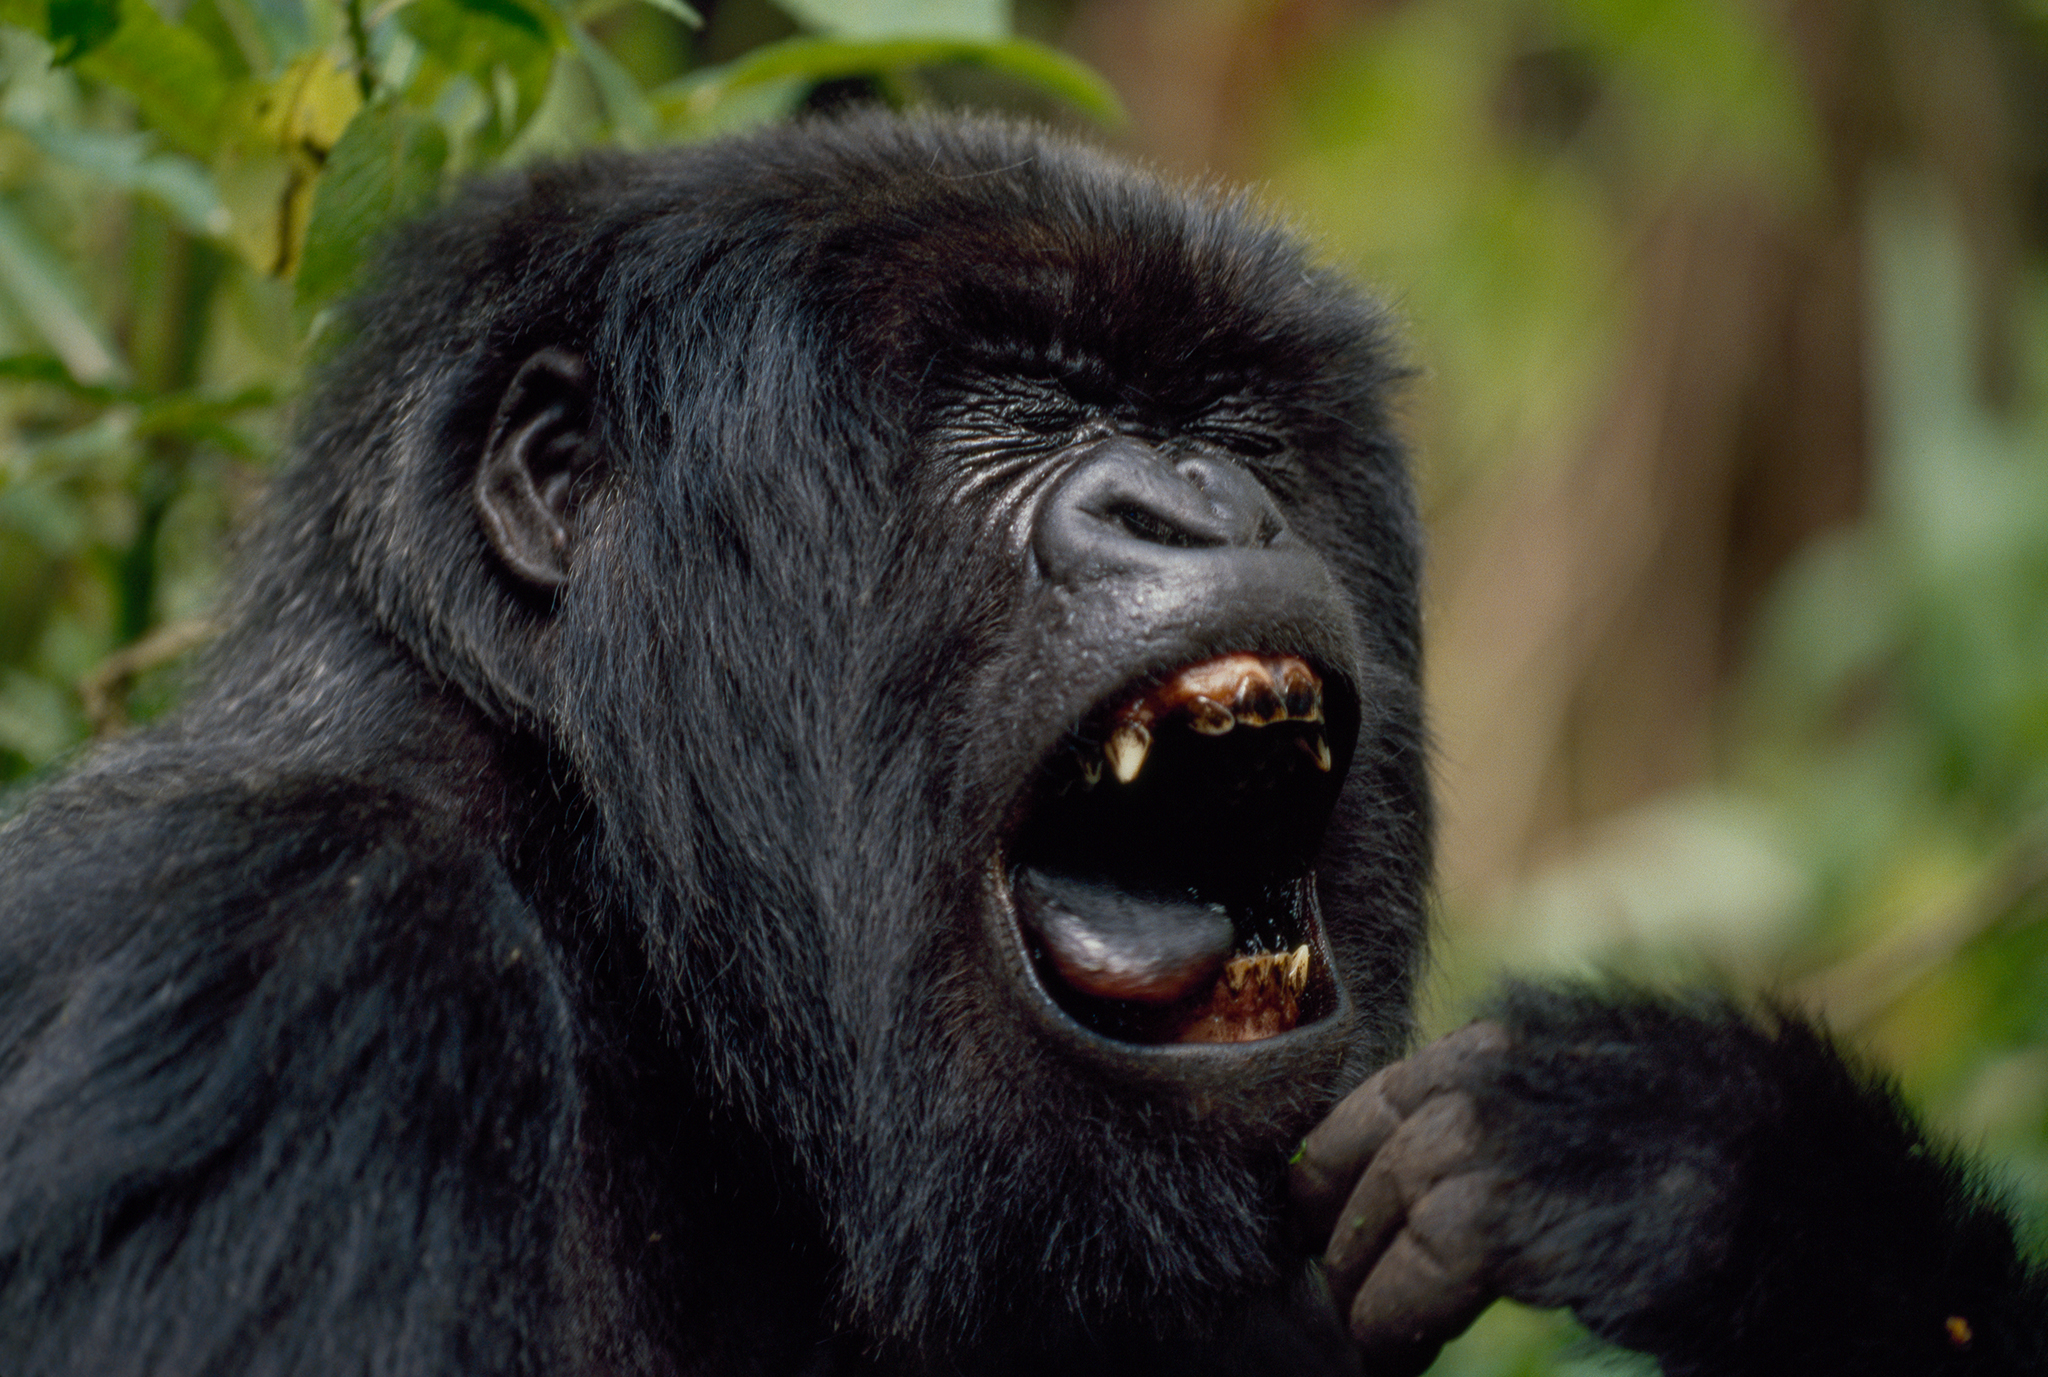 Why Do Plant-Eating Gorillas Have Big, Sharp Teeth?